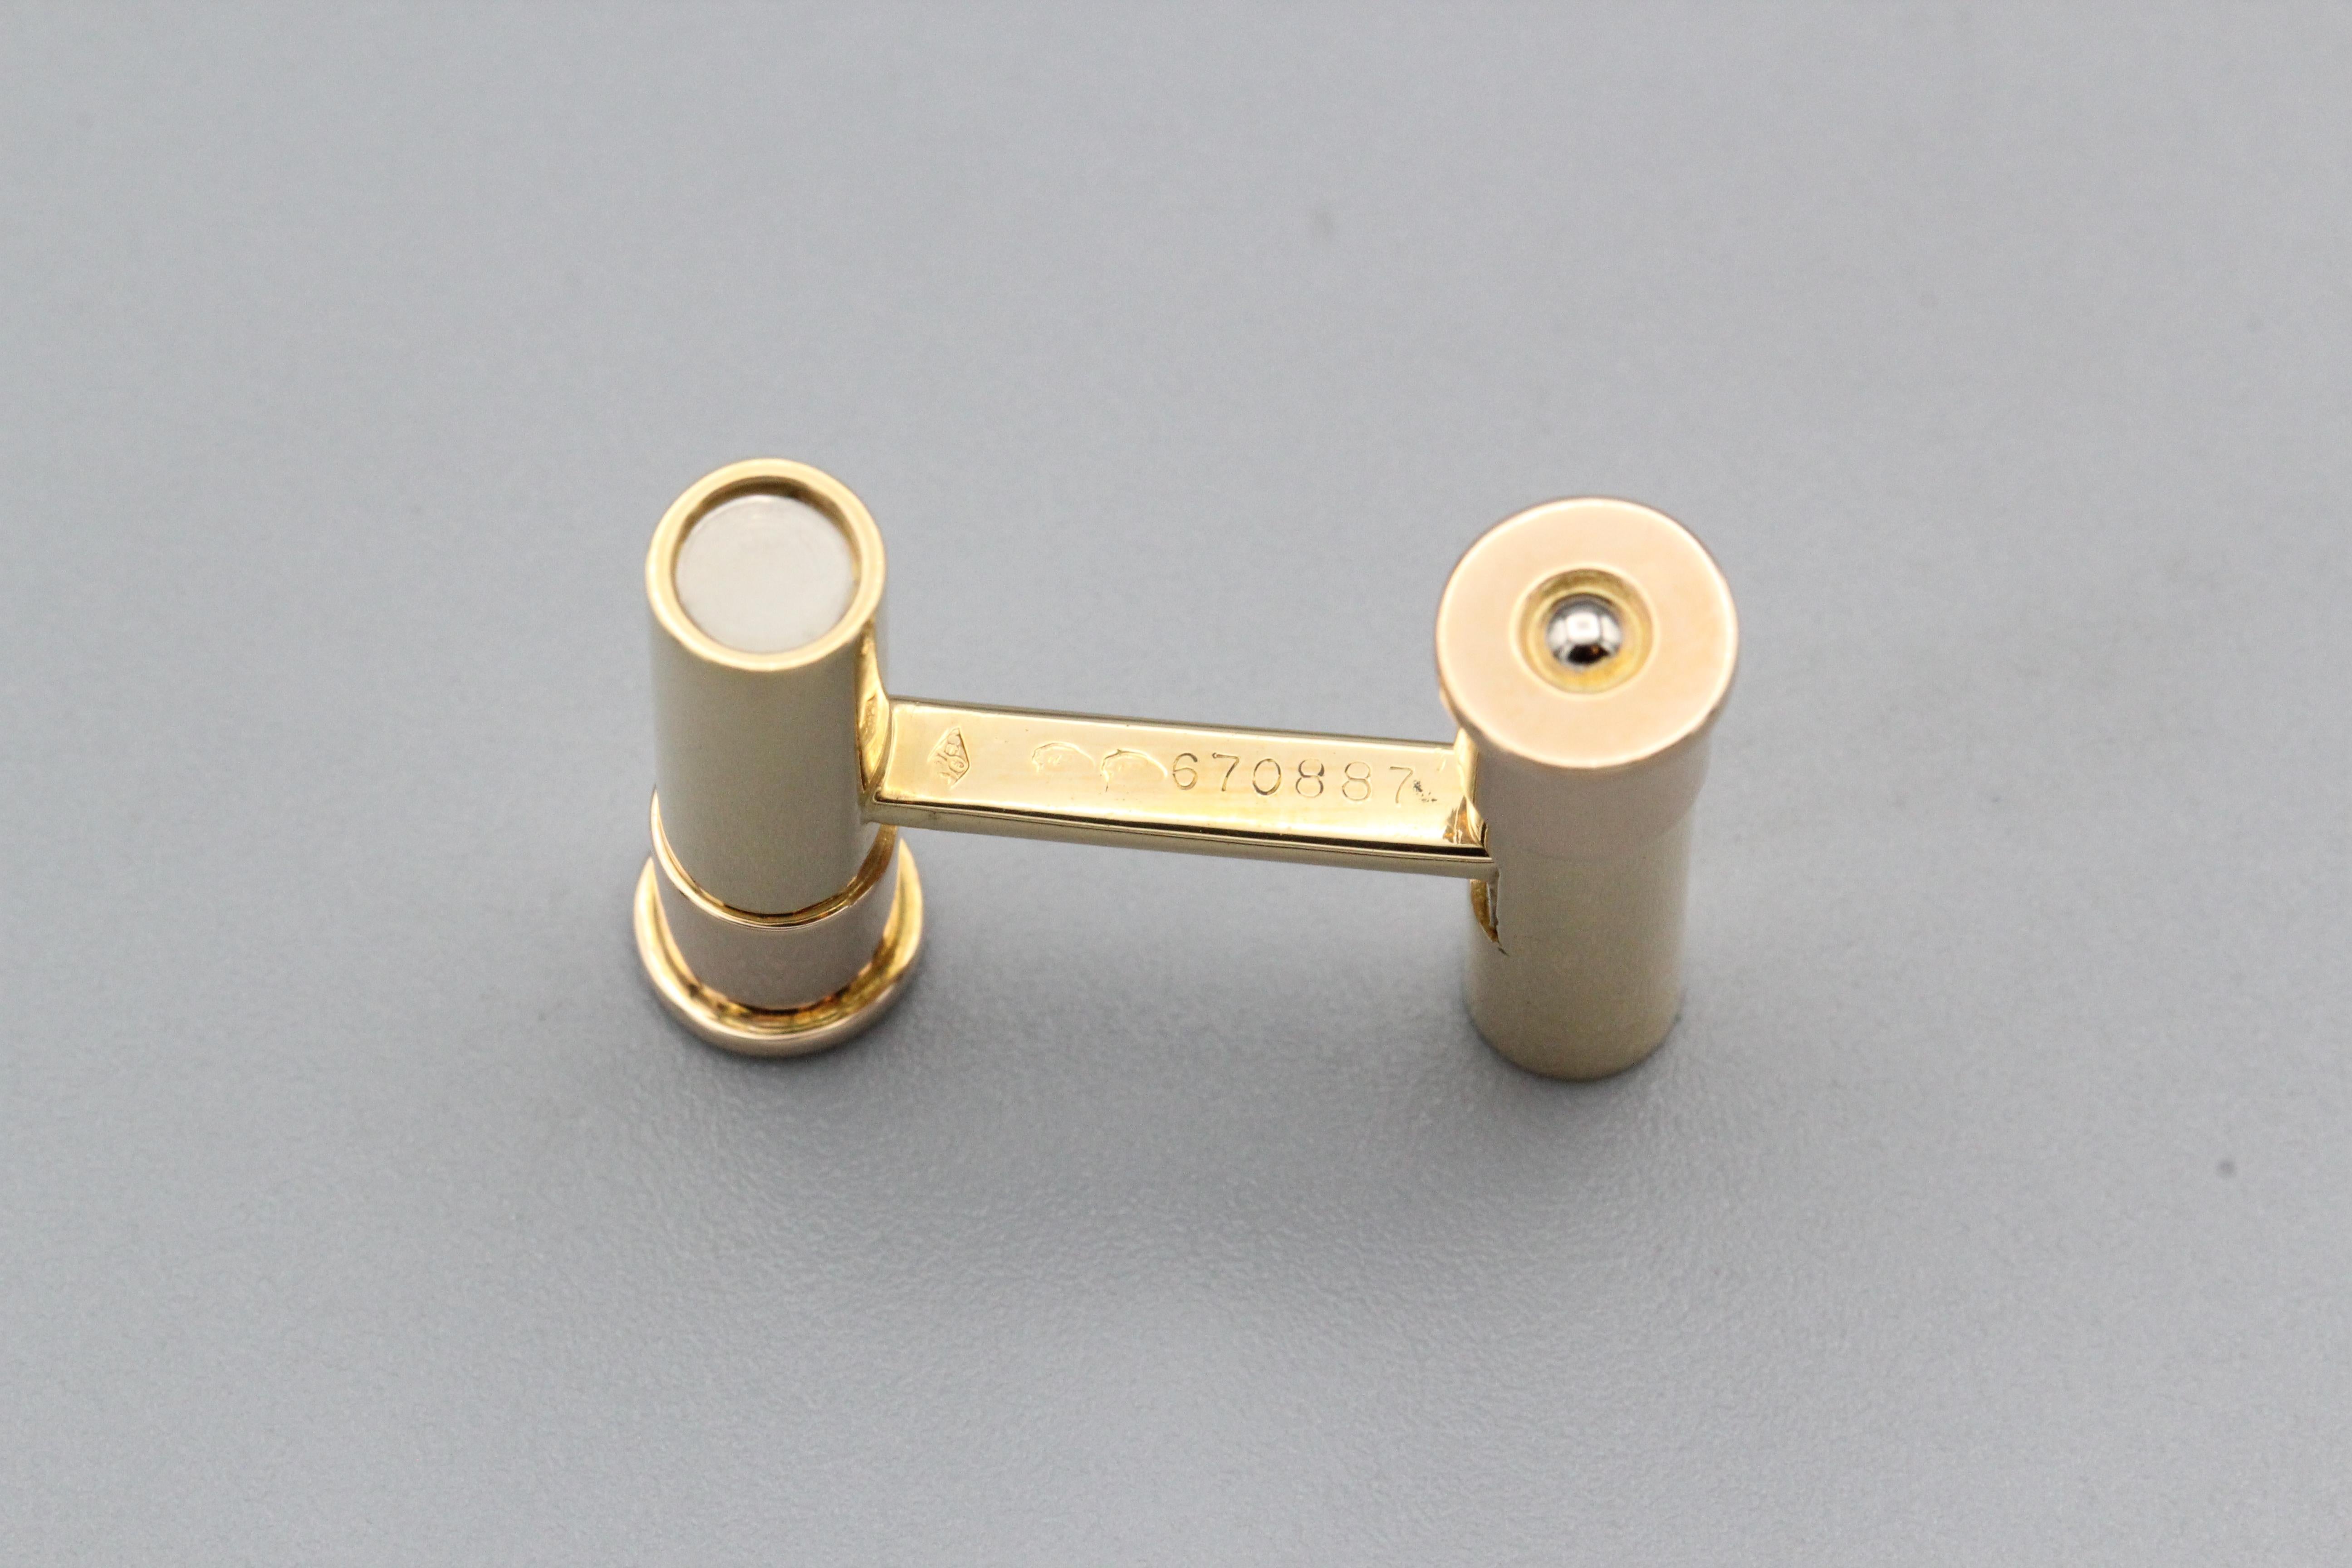 Cartier 18 Karat Gold Shotgun Shell Hunting Cufflinks In Excellent Condition For Sale In New York, NY